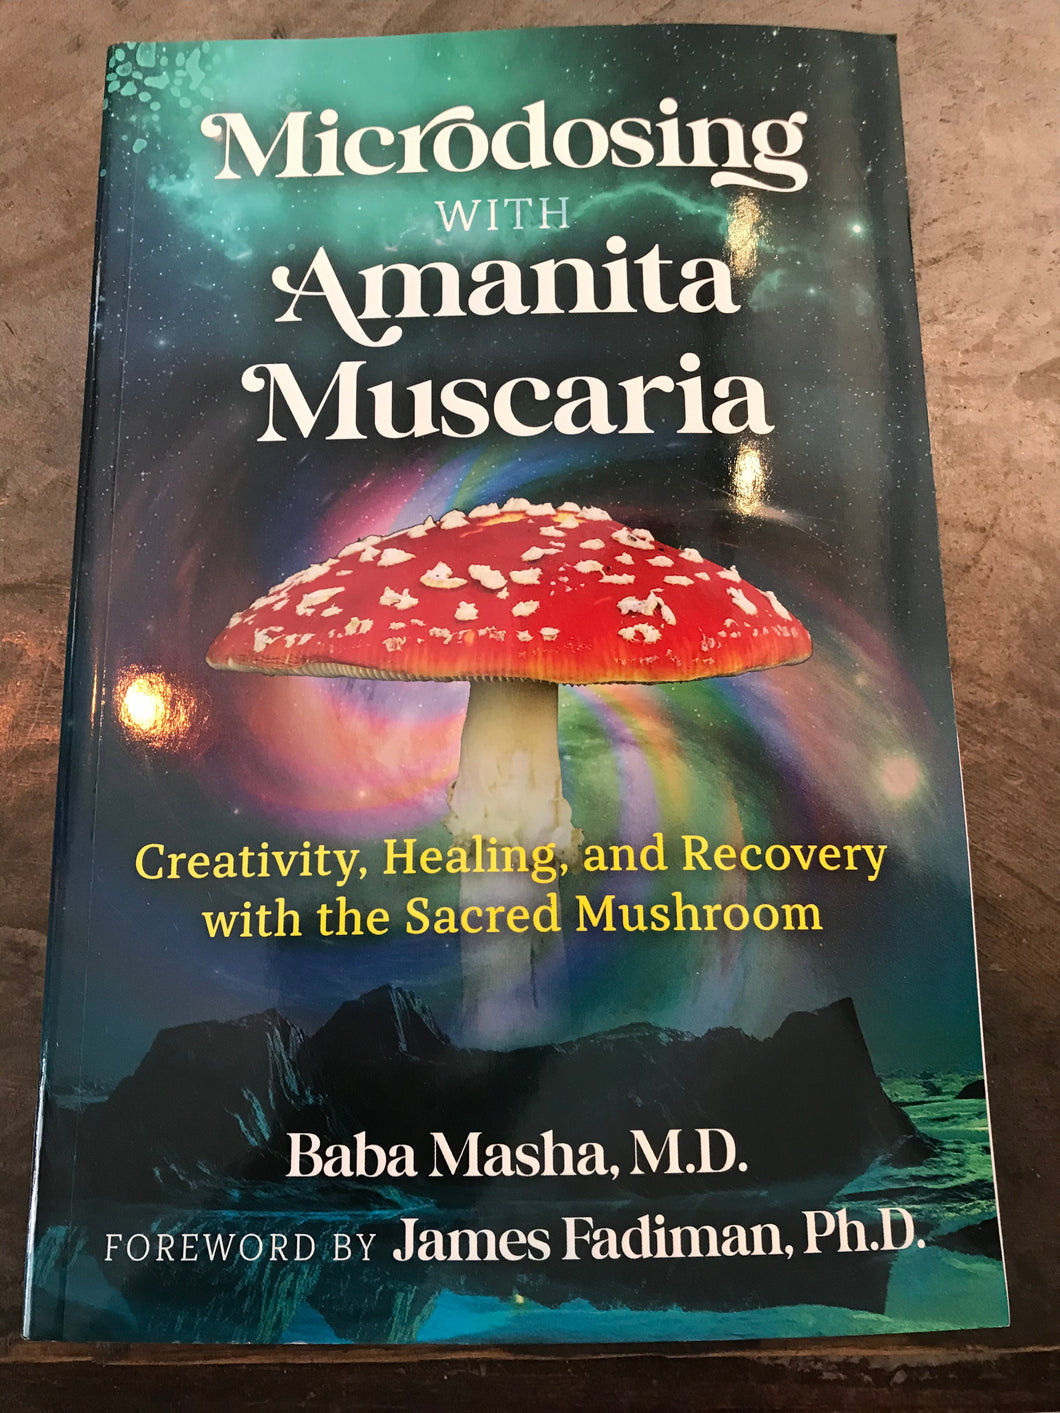 Microdosing with Amanita Muscaria: Creativity, Healing and Recovery book